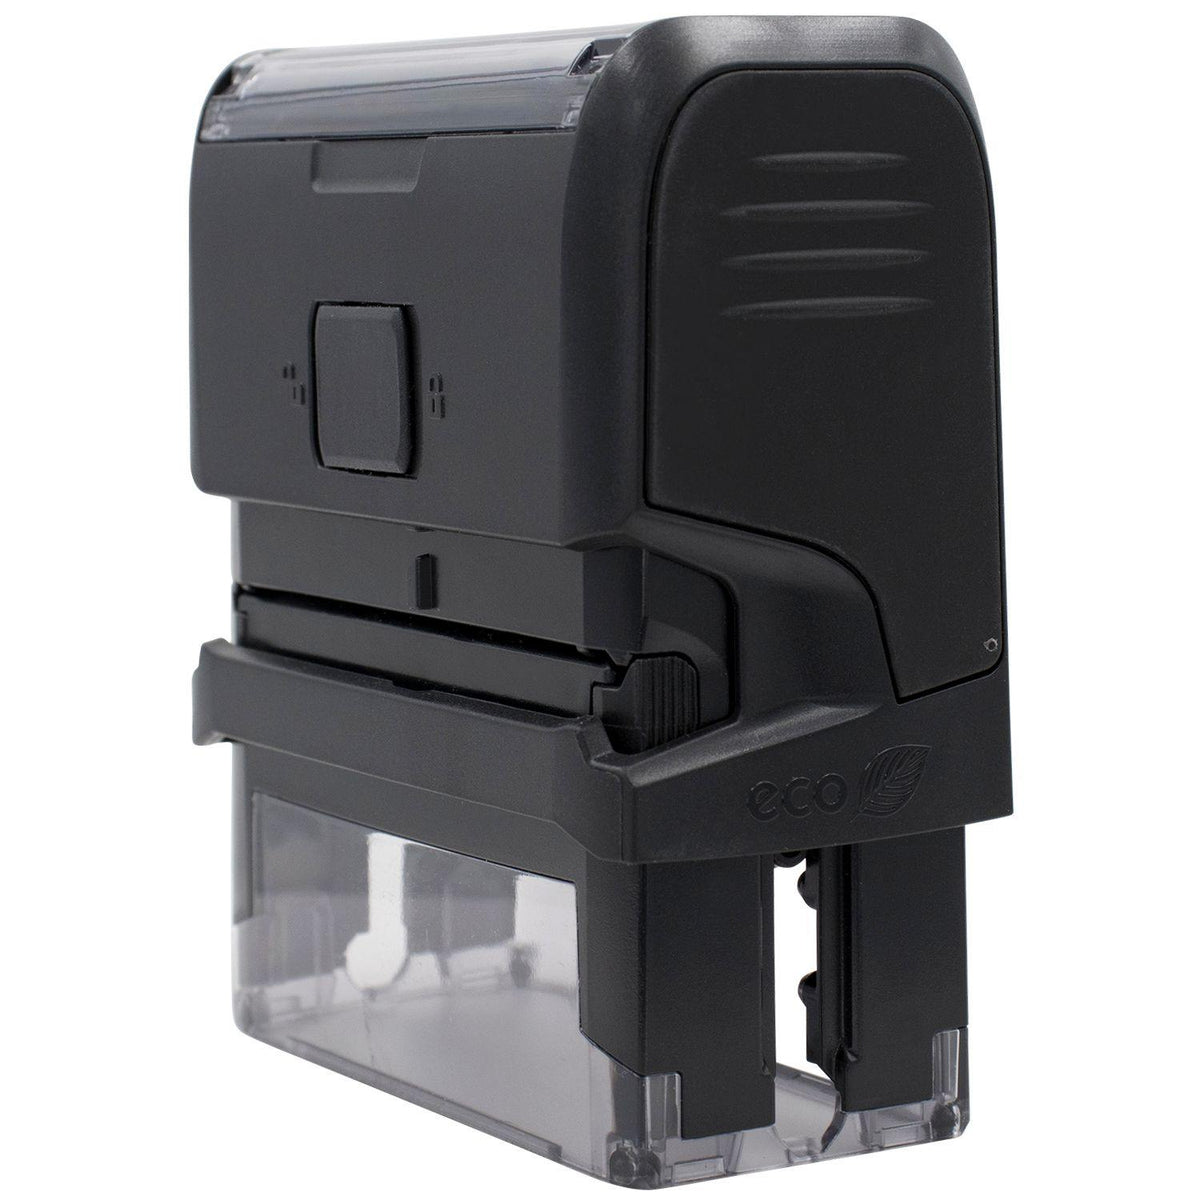 Self Inking Co-Pay Stamp - Engineer Seal Stamps - Brand_Trodat, Impression Size_Small, Stamp Type_Self-Inking Stamp, Type of Use_Medical Office